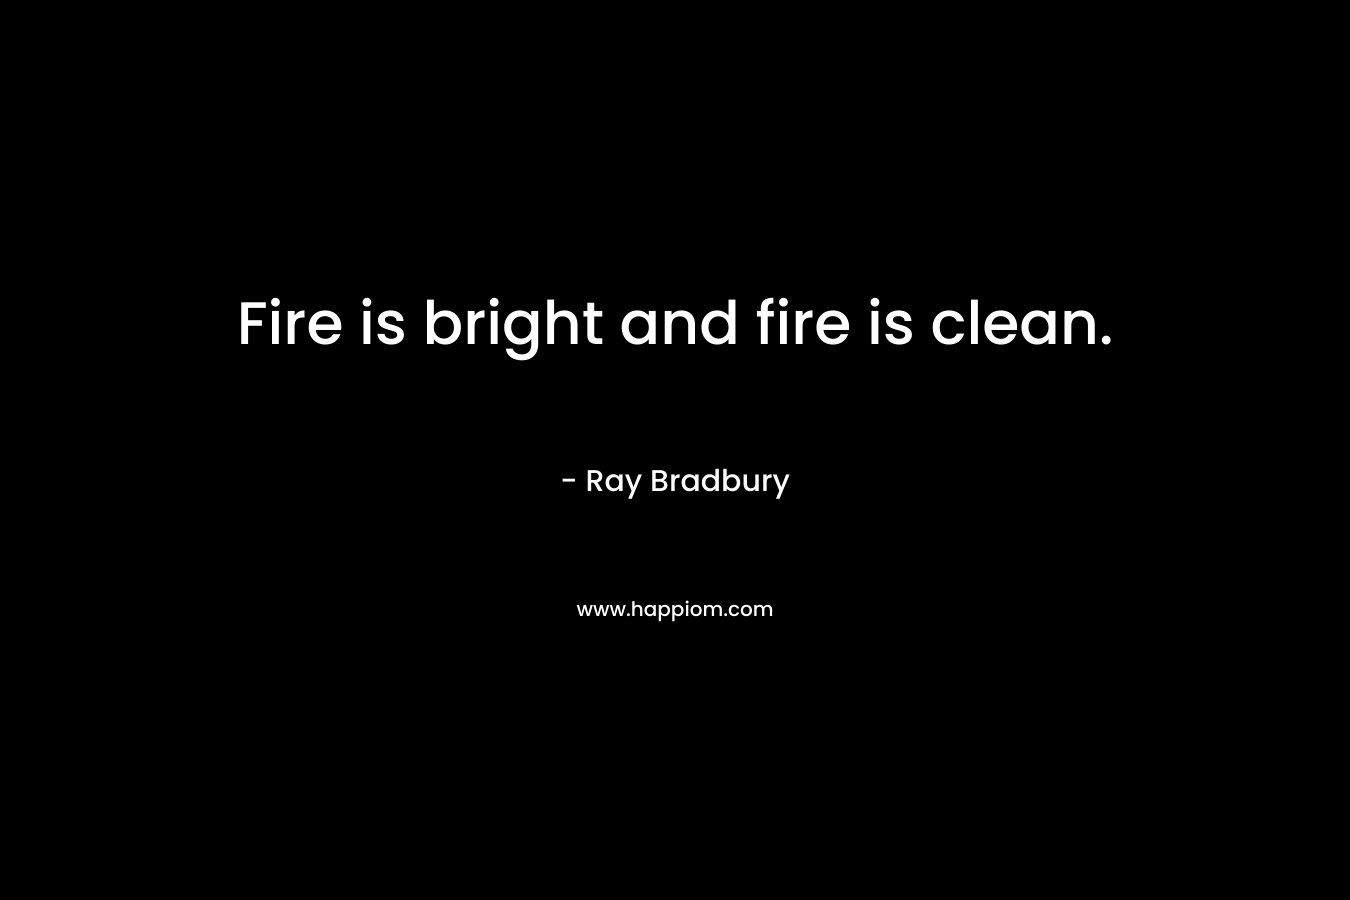 Fire is bright and fire is clean. – Ray Bradbury